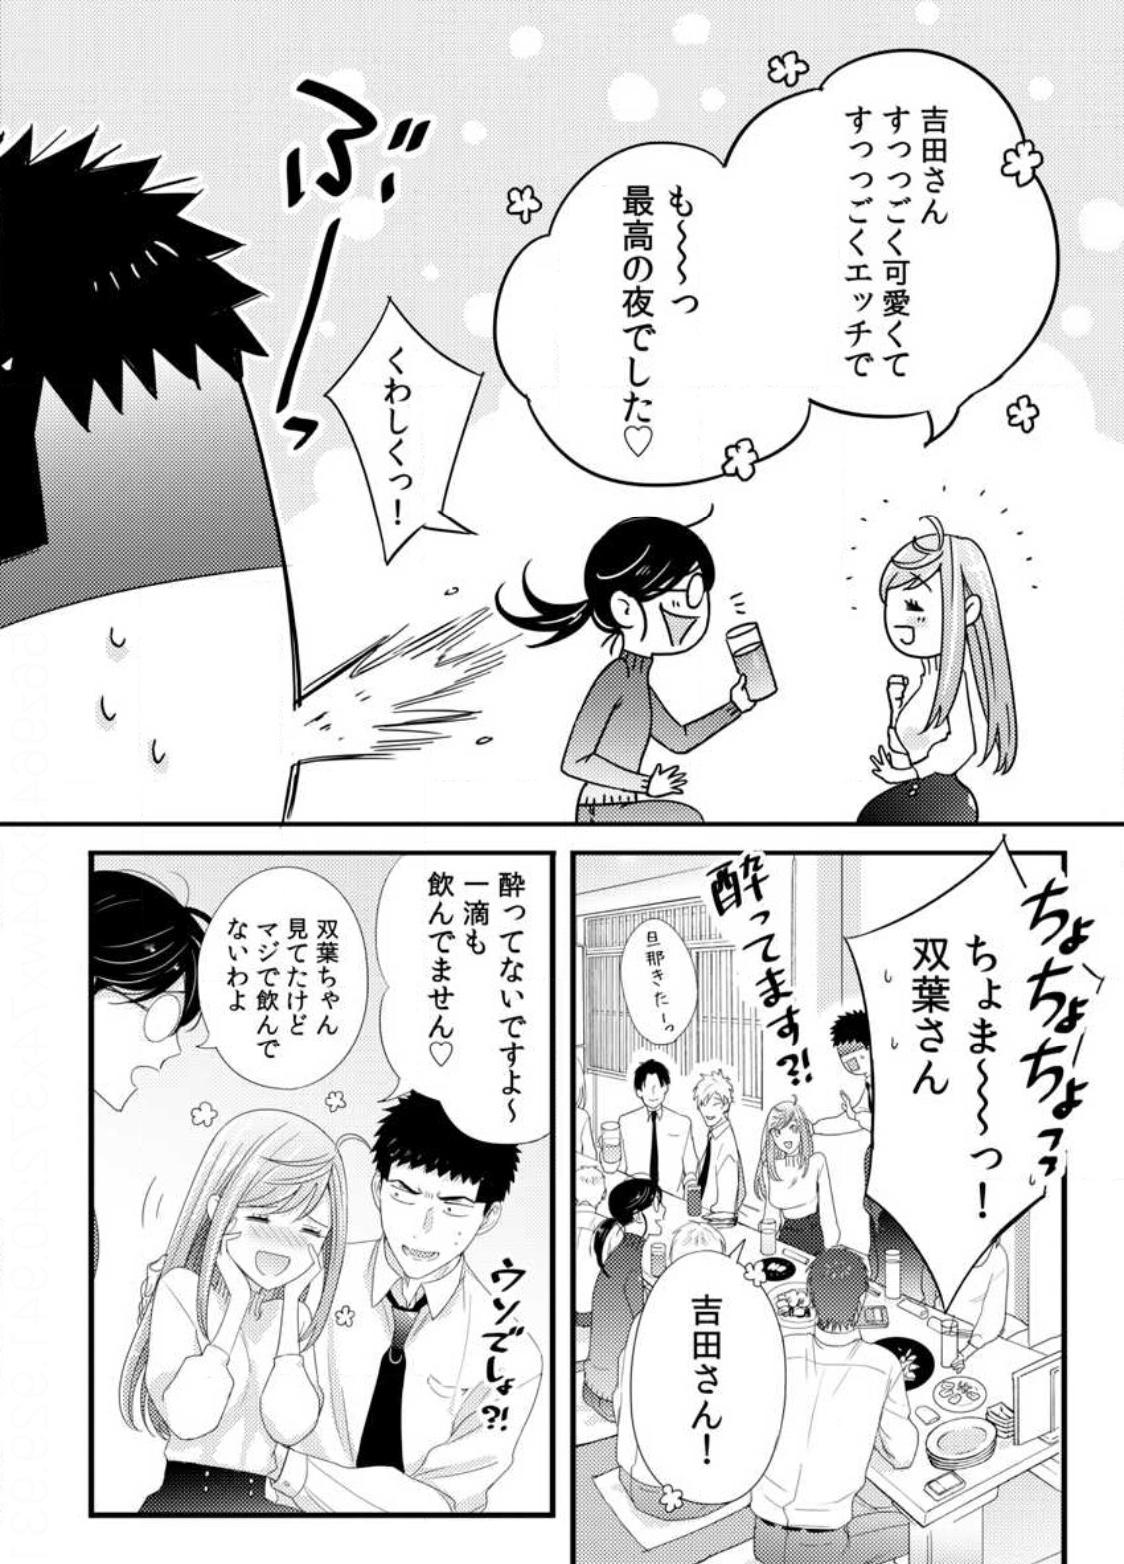 Please Let Me Hold You Futaba-San! Ch. 1-4 81